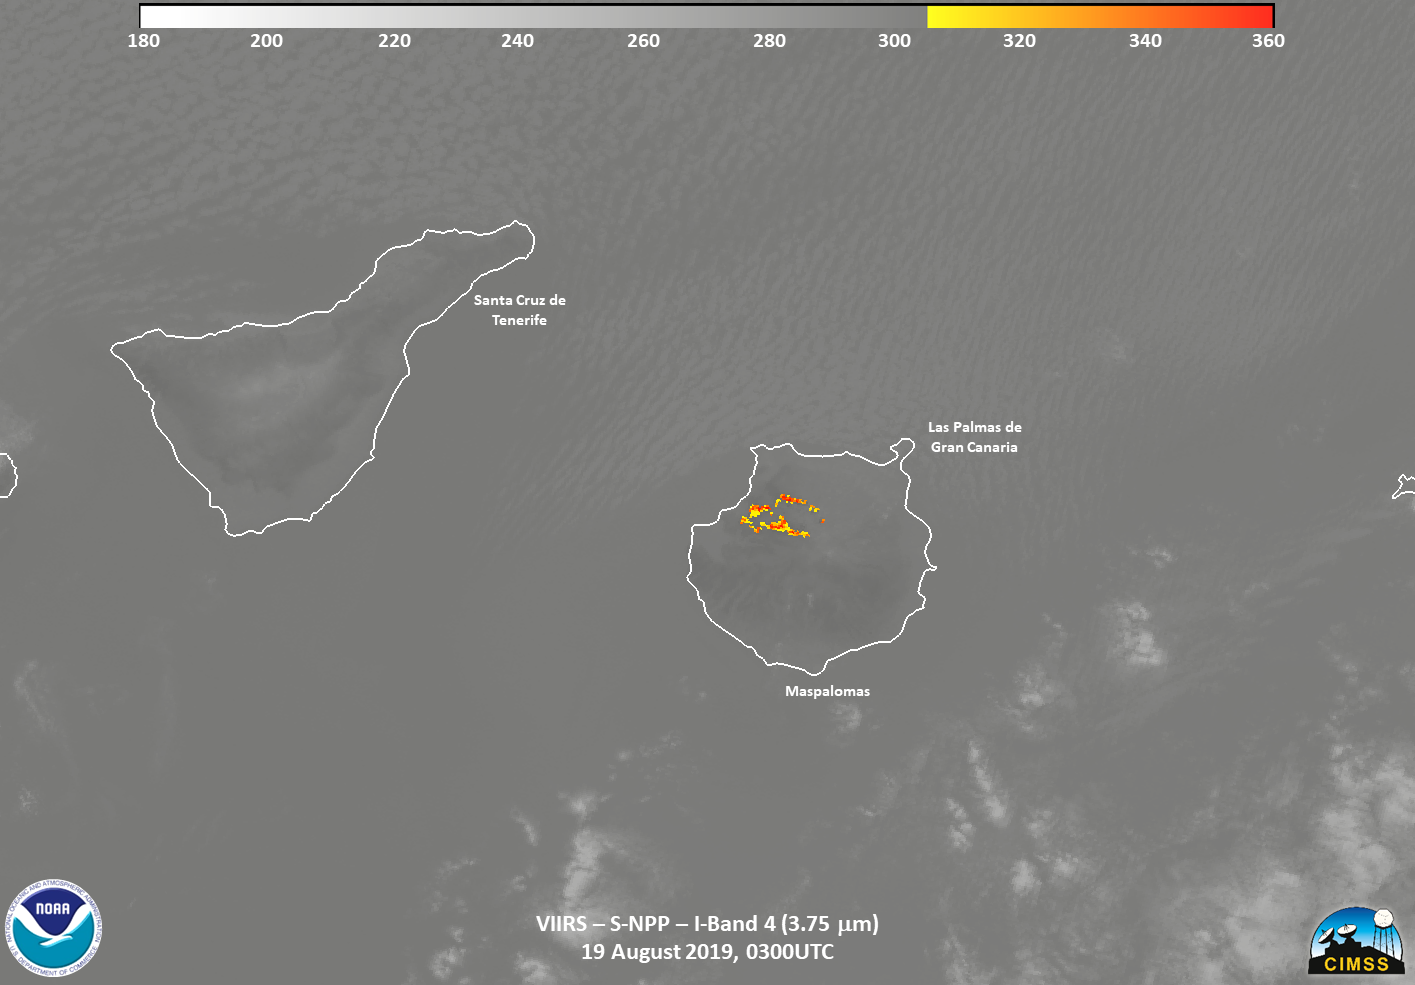 Suomi NPP image of the fires on Gran Canaria.